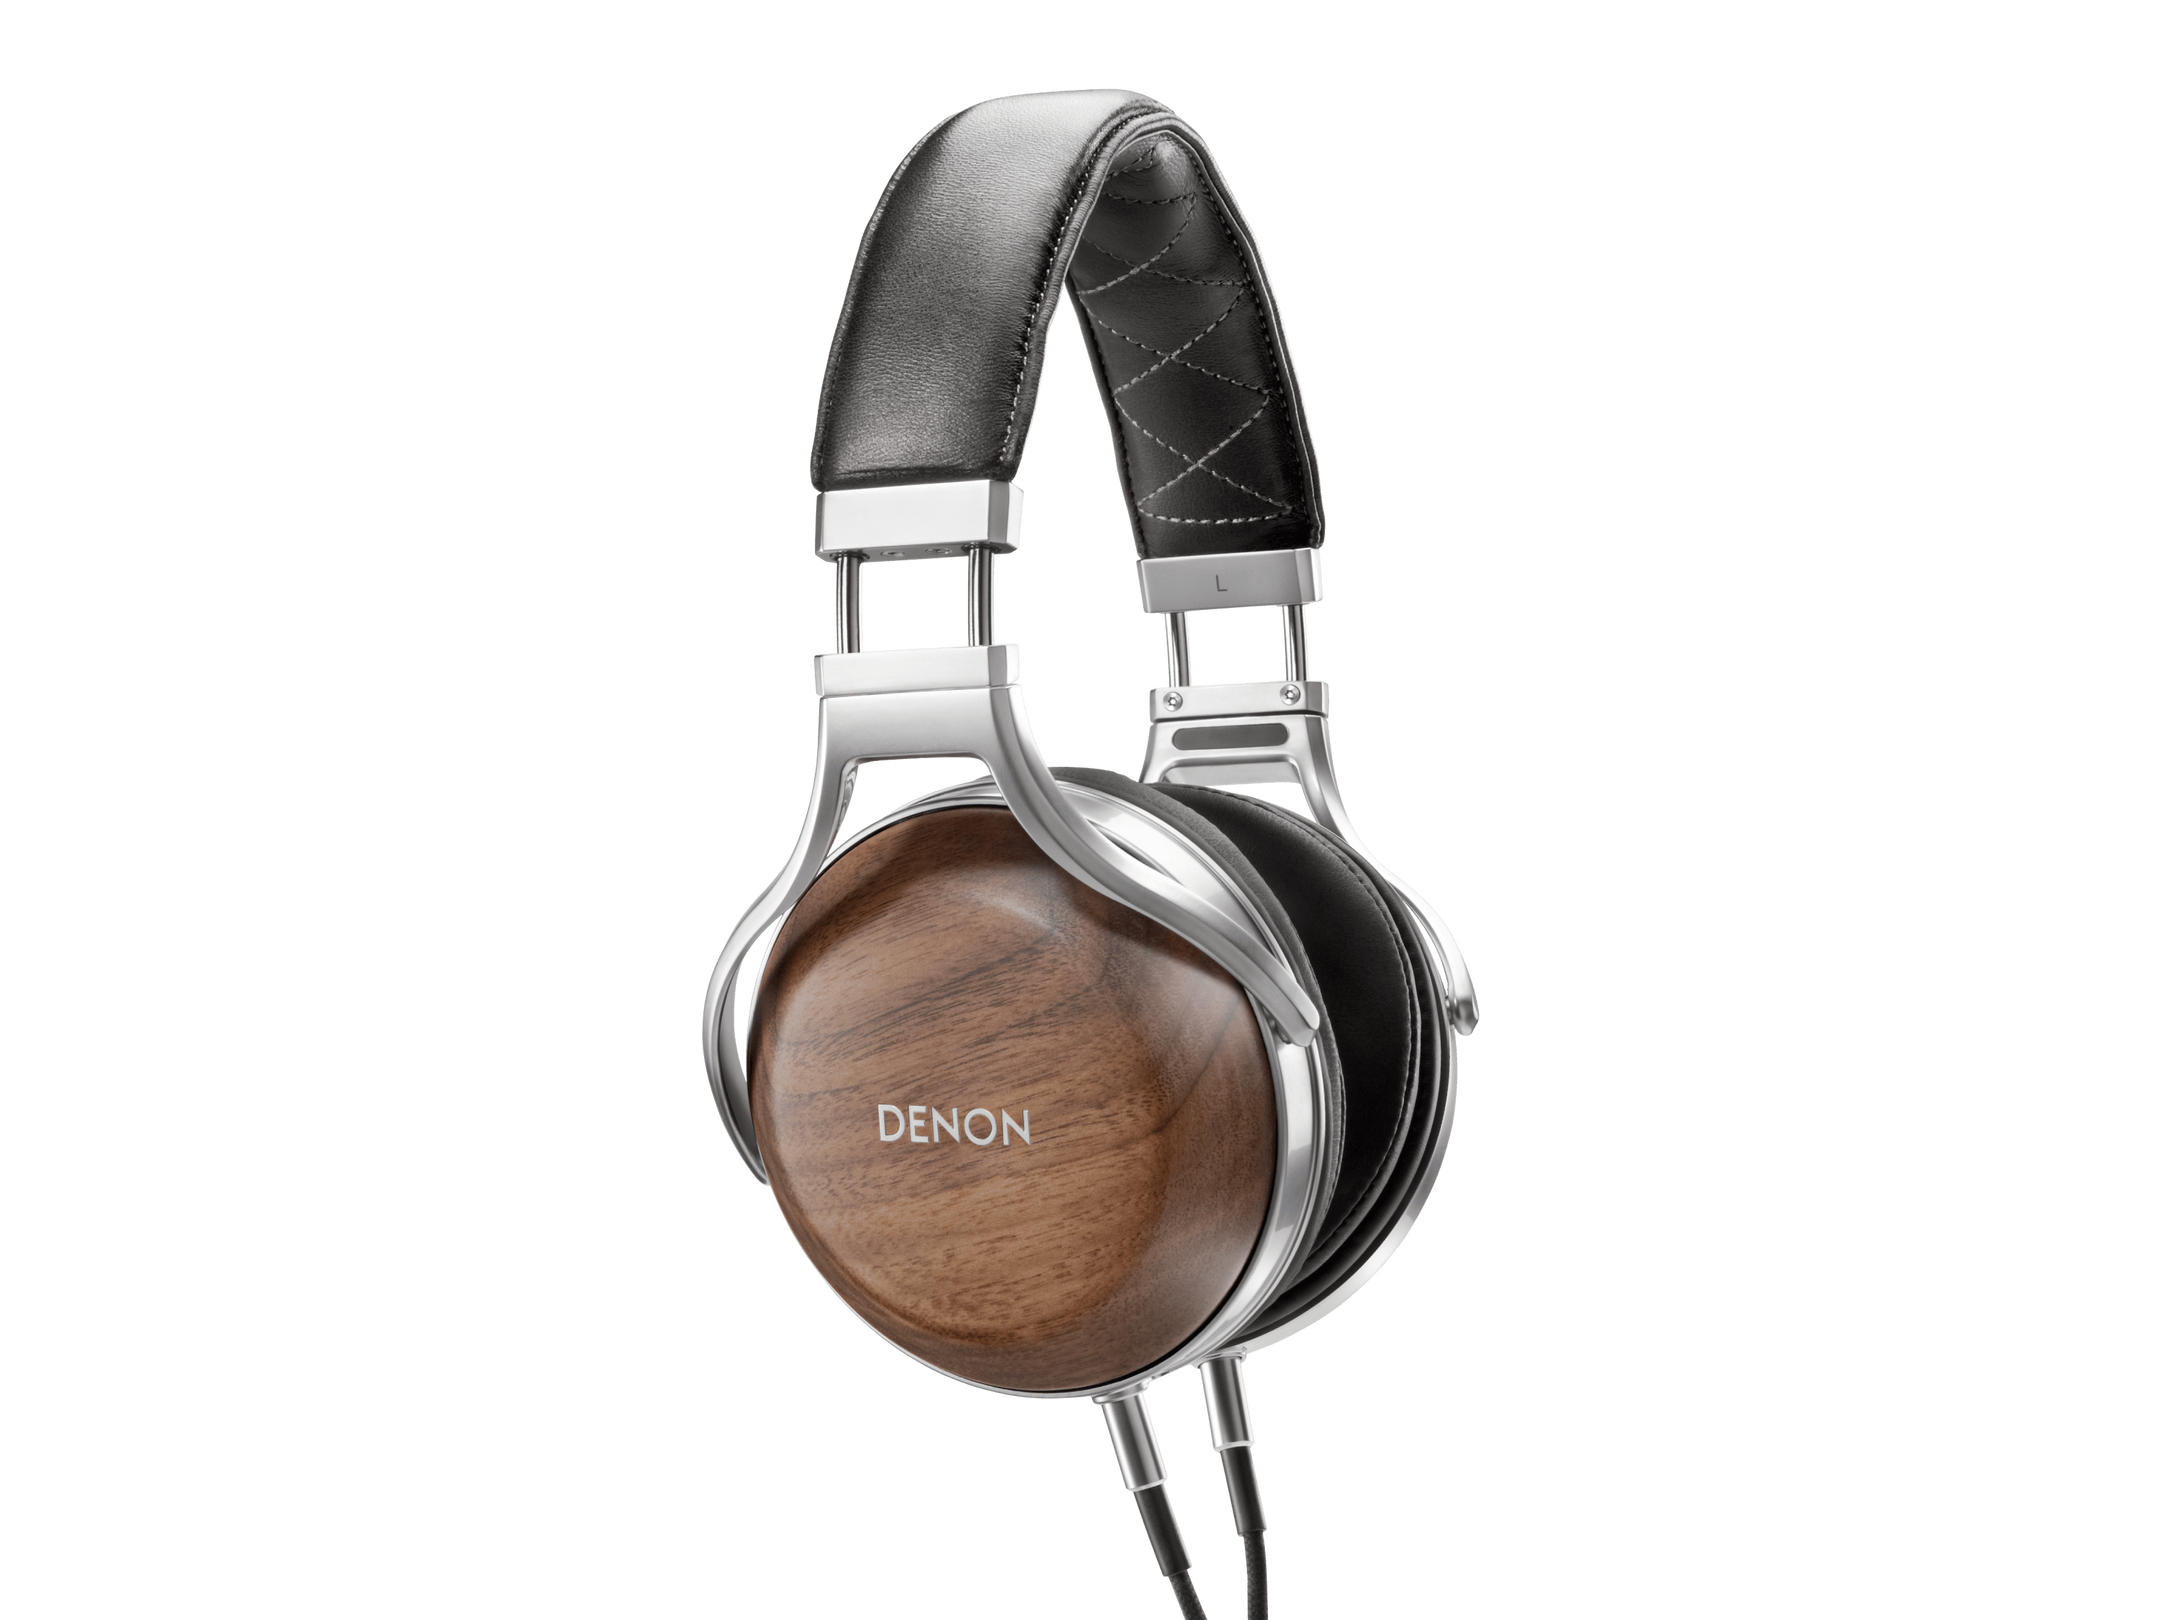 AH-D7200 - Reference Hi-Fi Headphones with drivers made in Japan